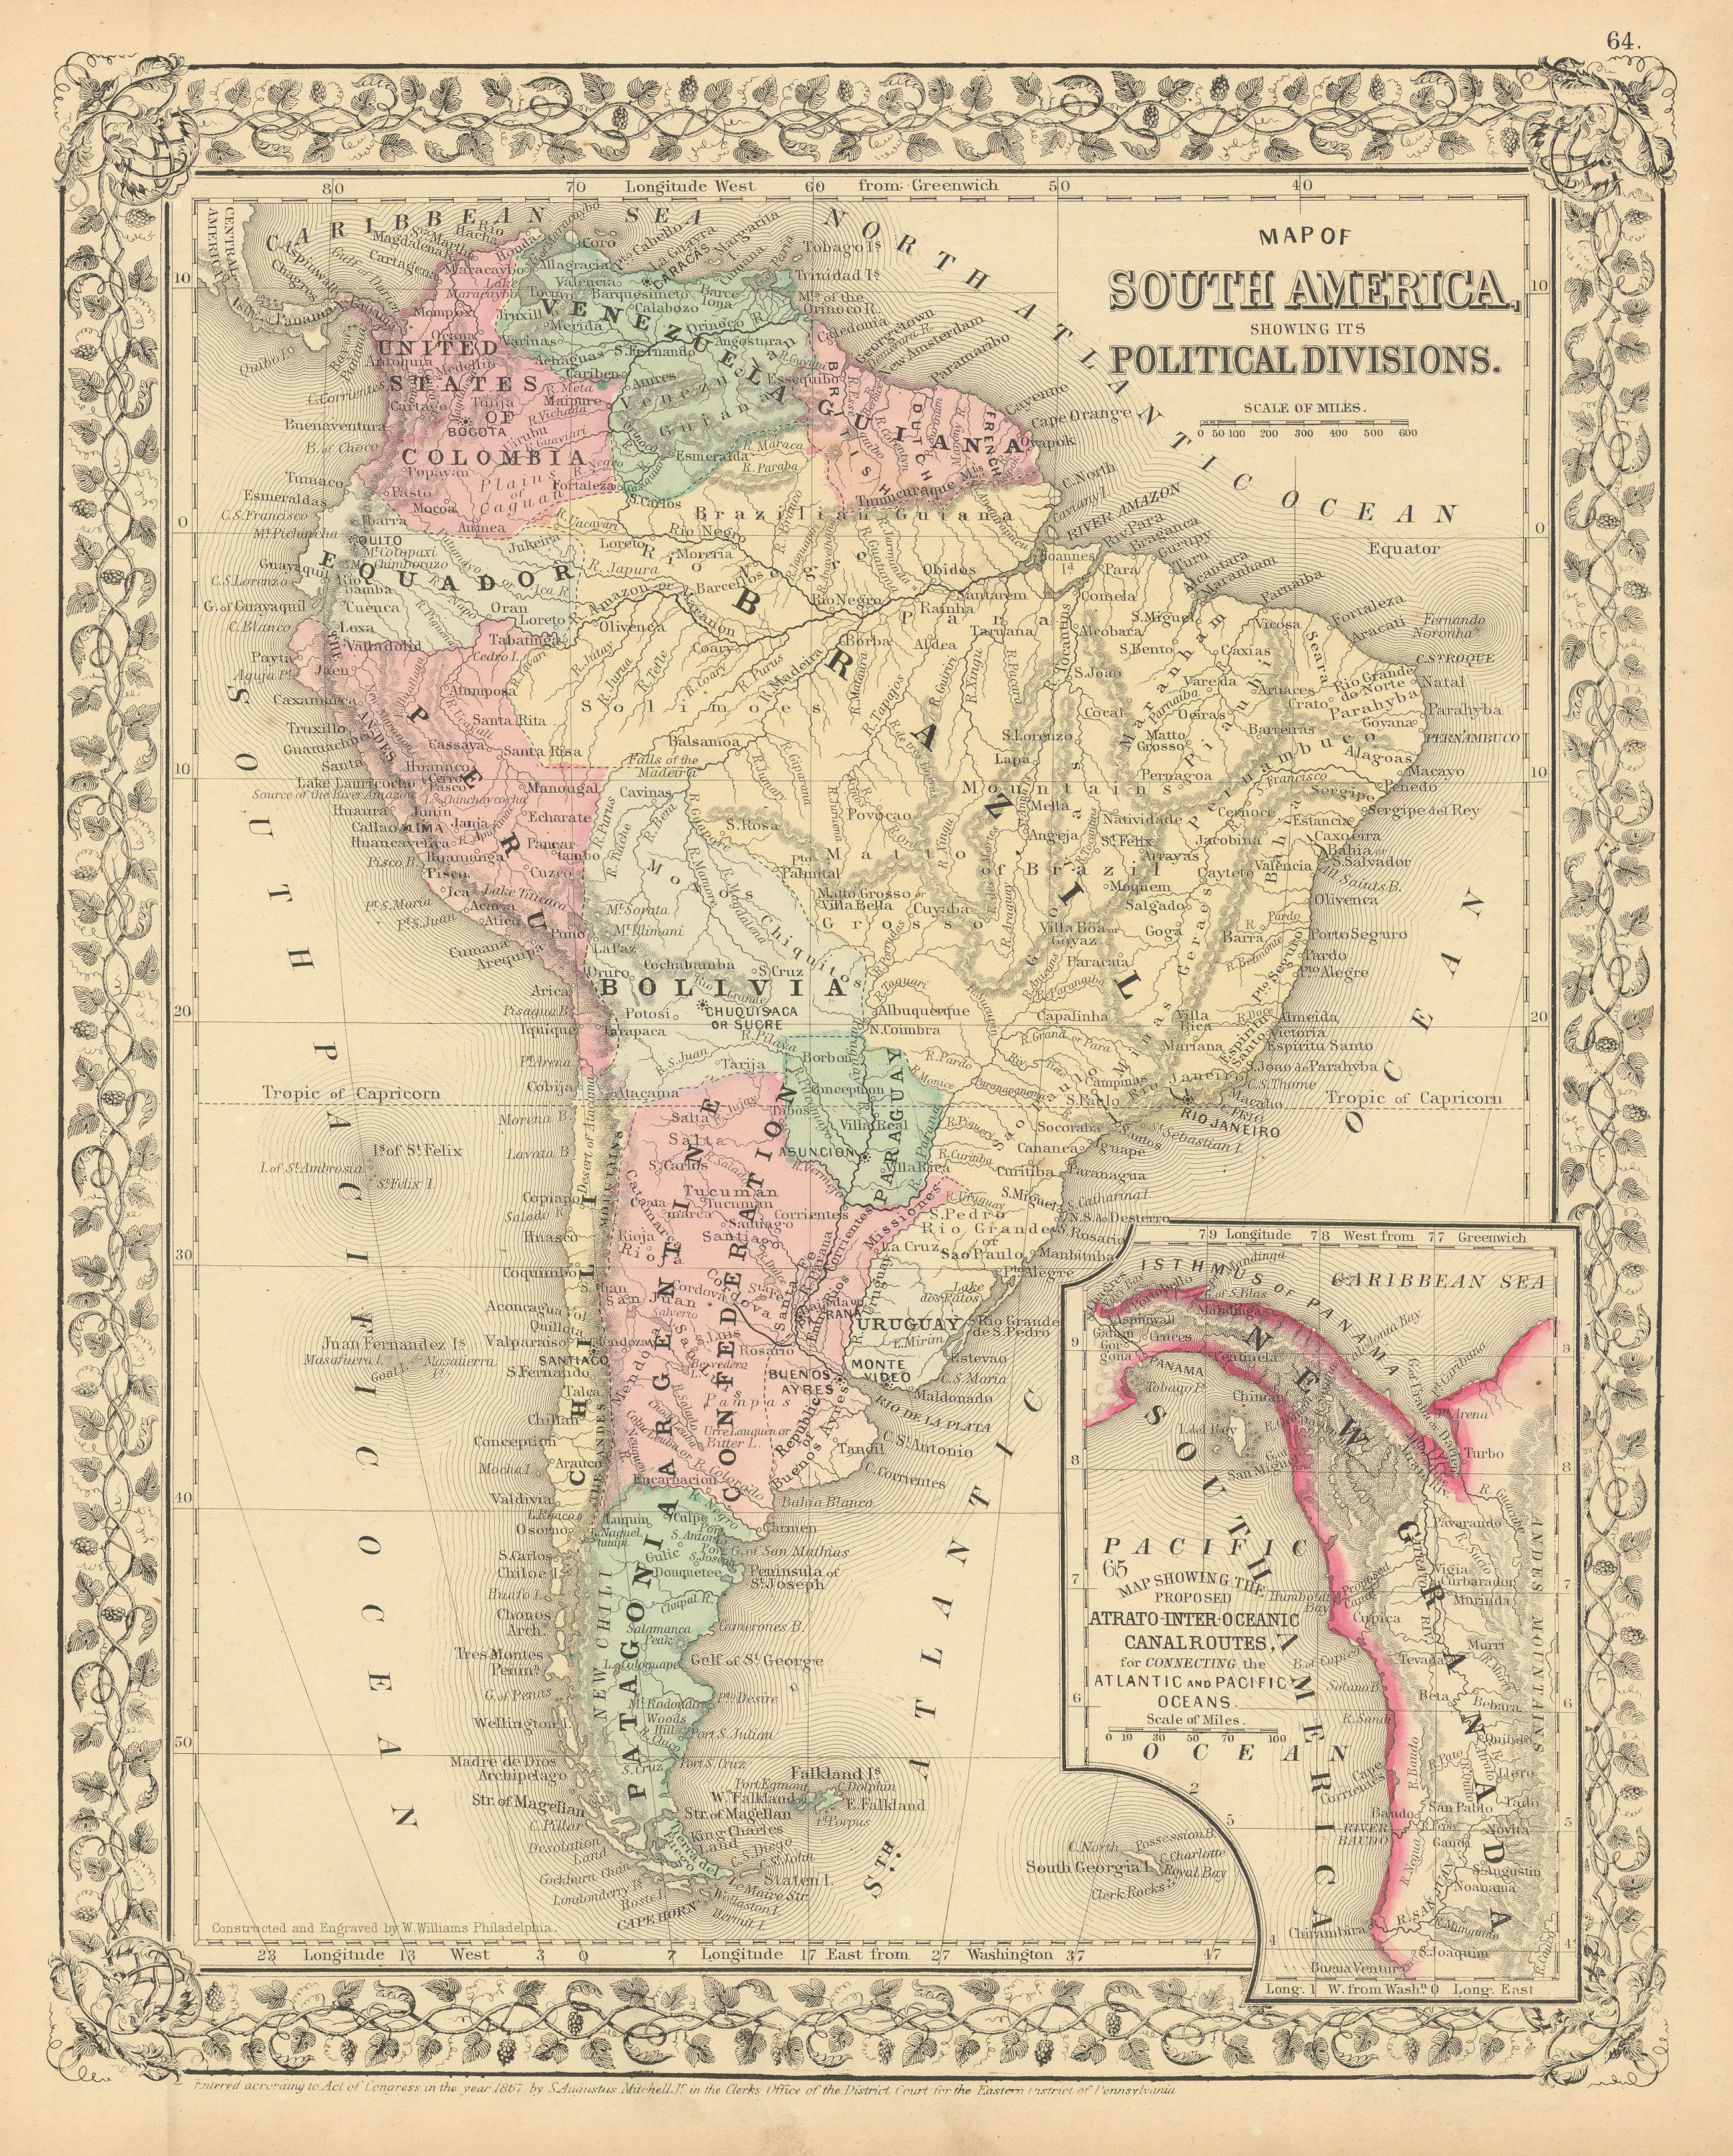 Associate Product South America. Proposed Atrato-Inter-Oceanic Canal Routes. MITCHELL 1869 map